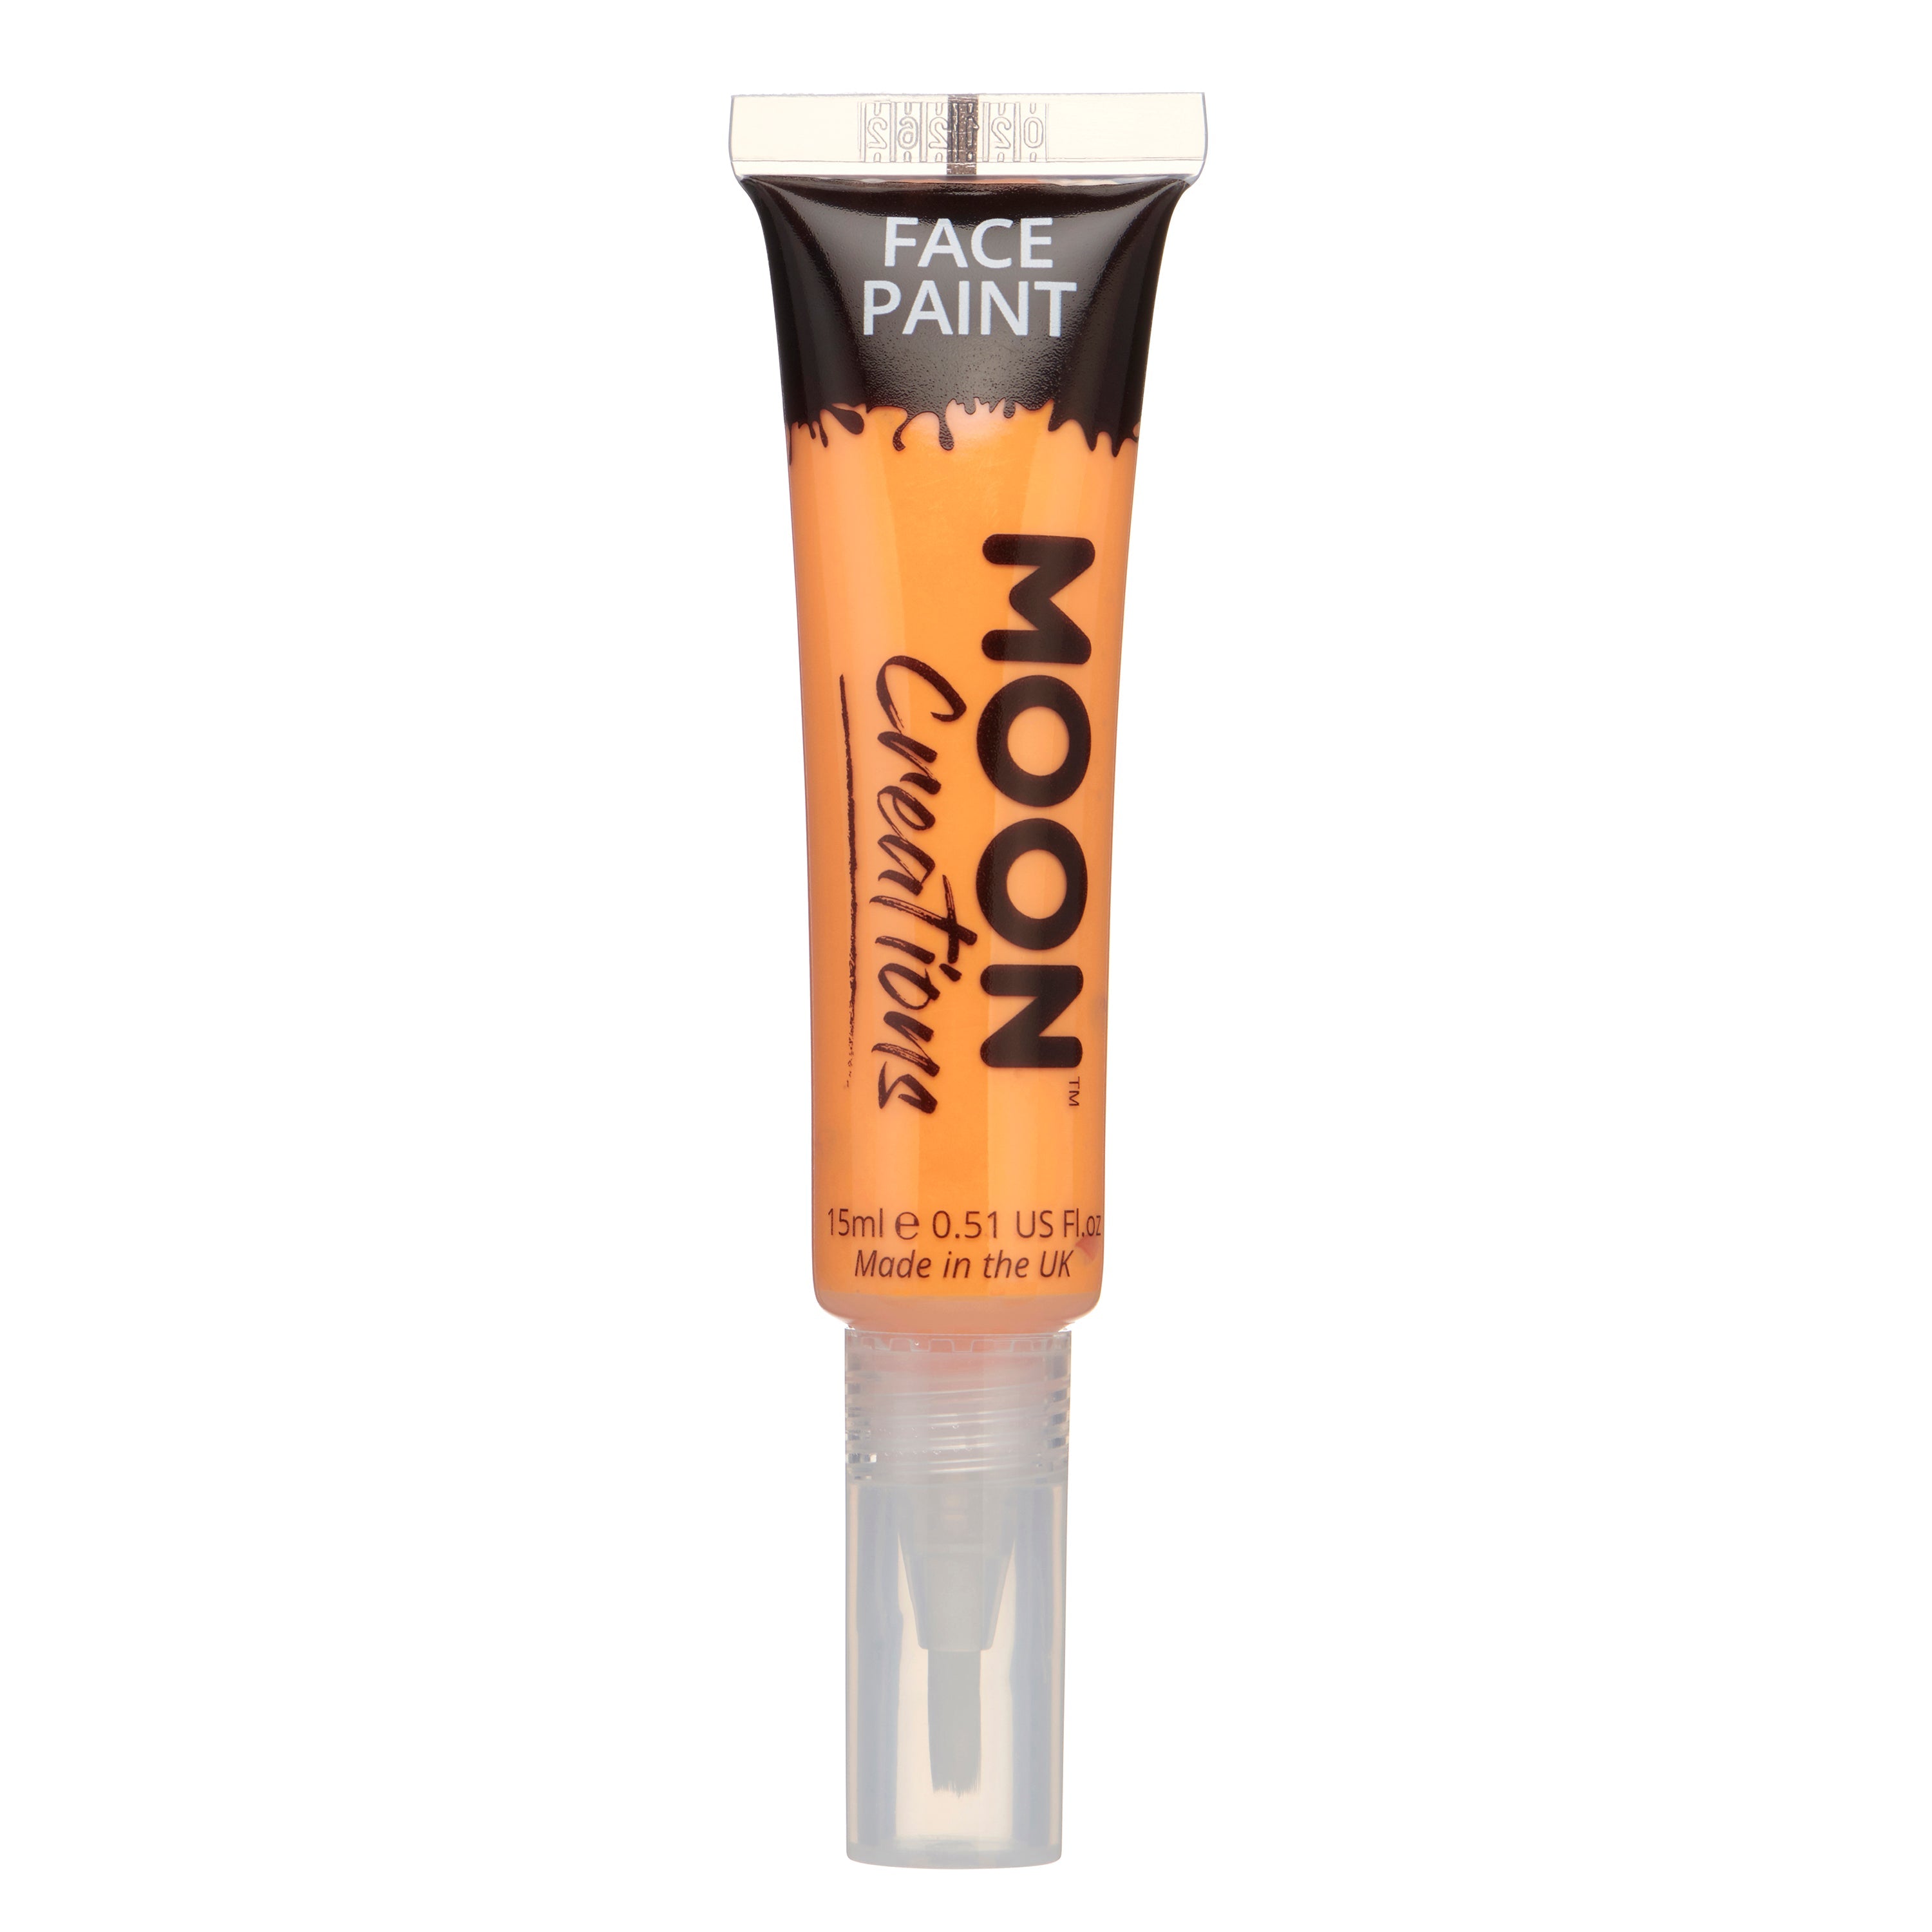 Orange - Face & Body Paint Makeup w/brush, 15mL. Cosmetically certified, FDA & Health Canada compliant, cruelty free and vegan.